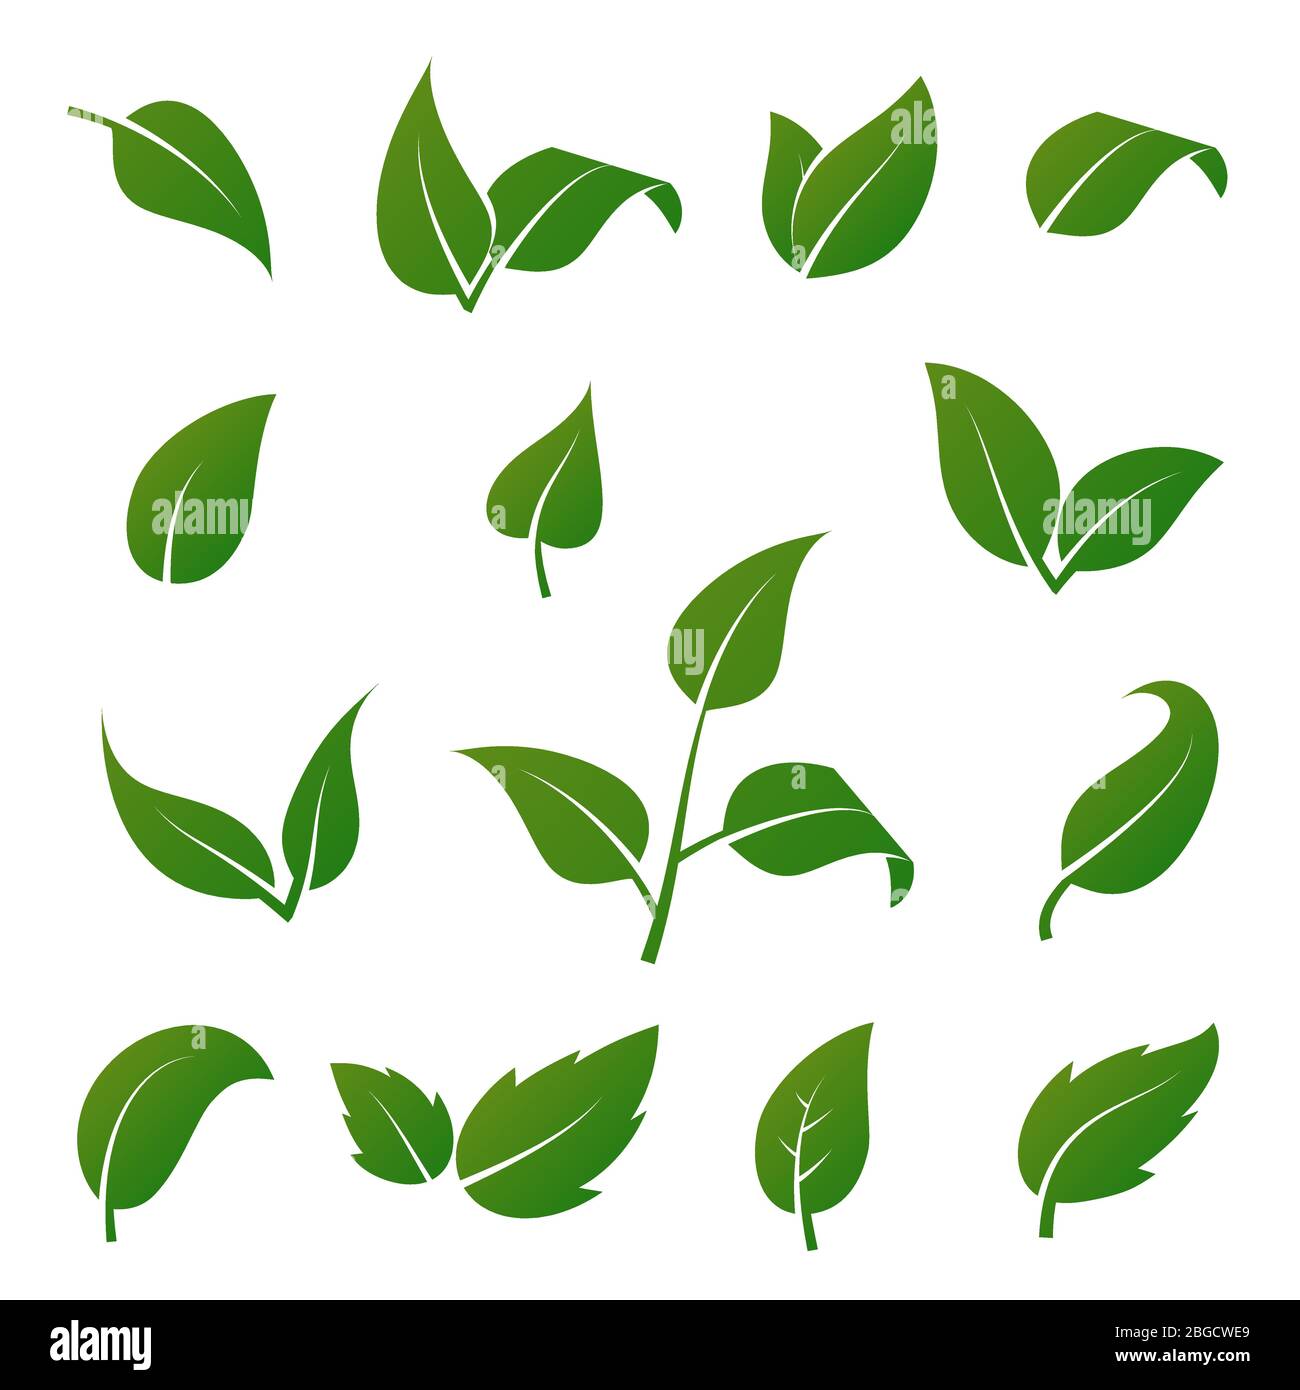 Green tree and plant leaves vector icons isolated on white background. Eco symbols set. Plant green leaf, organic natural floral illustration Stock Vector